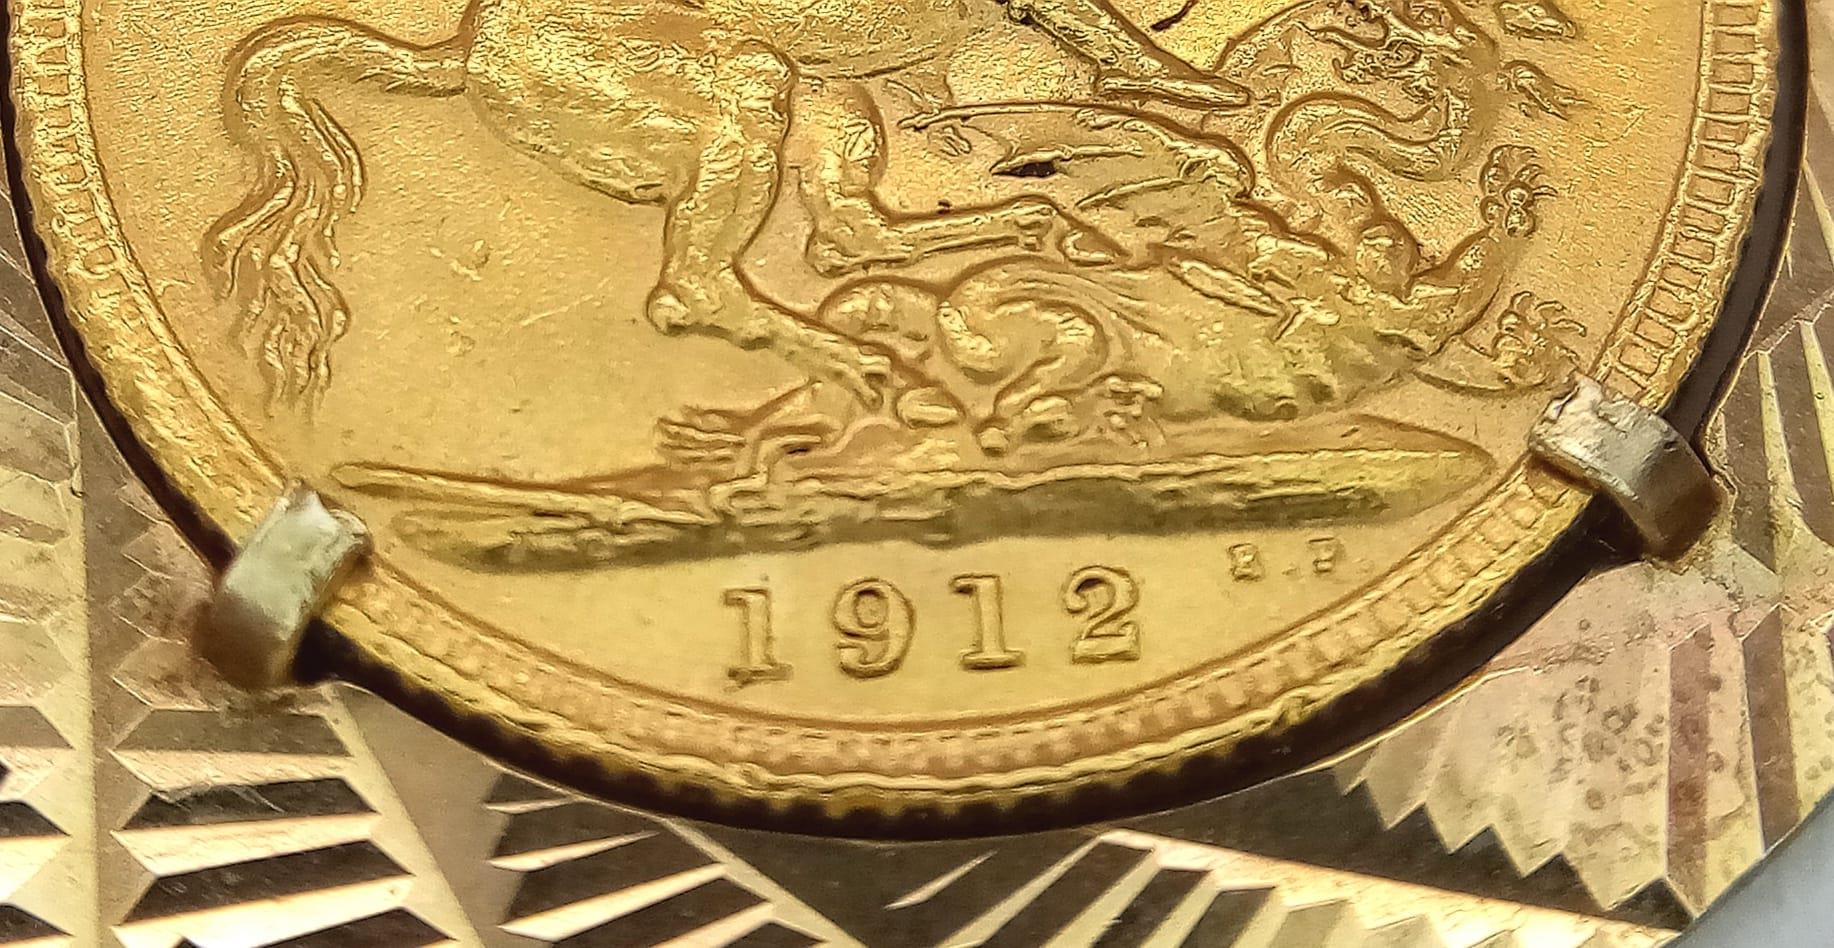 A 22K GOLD GEORGE V SOVEREIGN DATED 1912 SET IN A 9K GOLD CIRCULAR DISC WITH GEOMETRIC DESIGN AND ON - Image 3 of 4